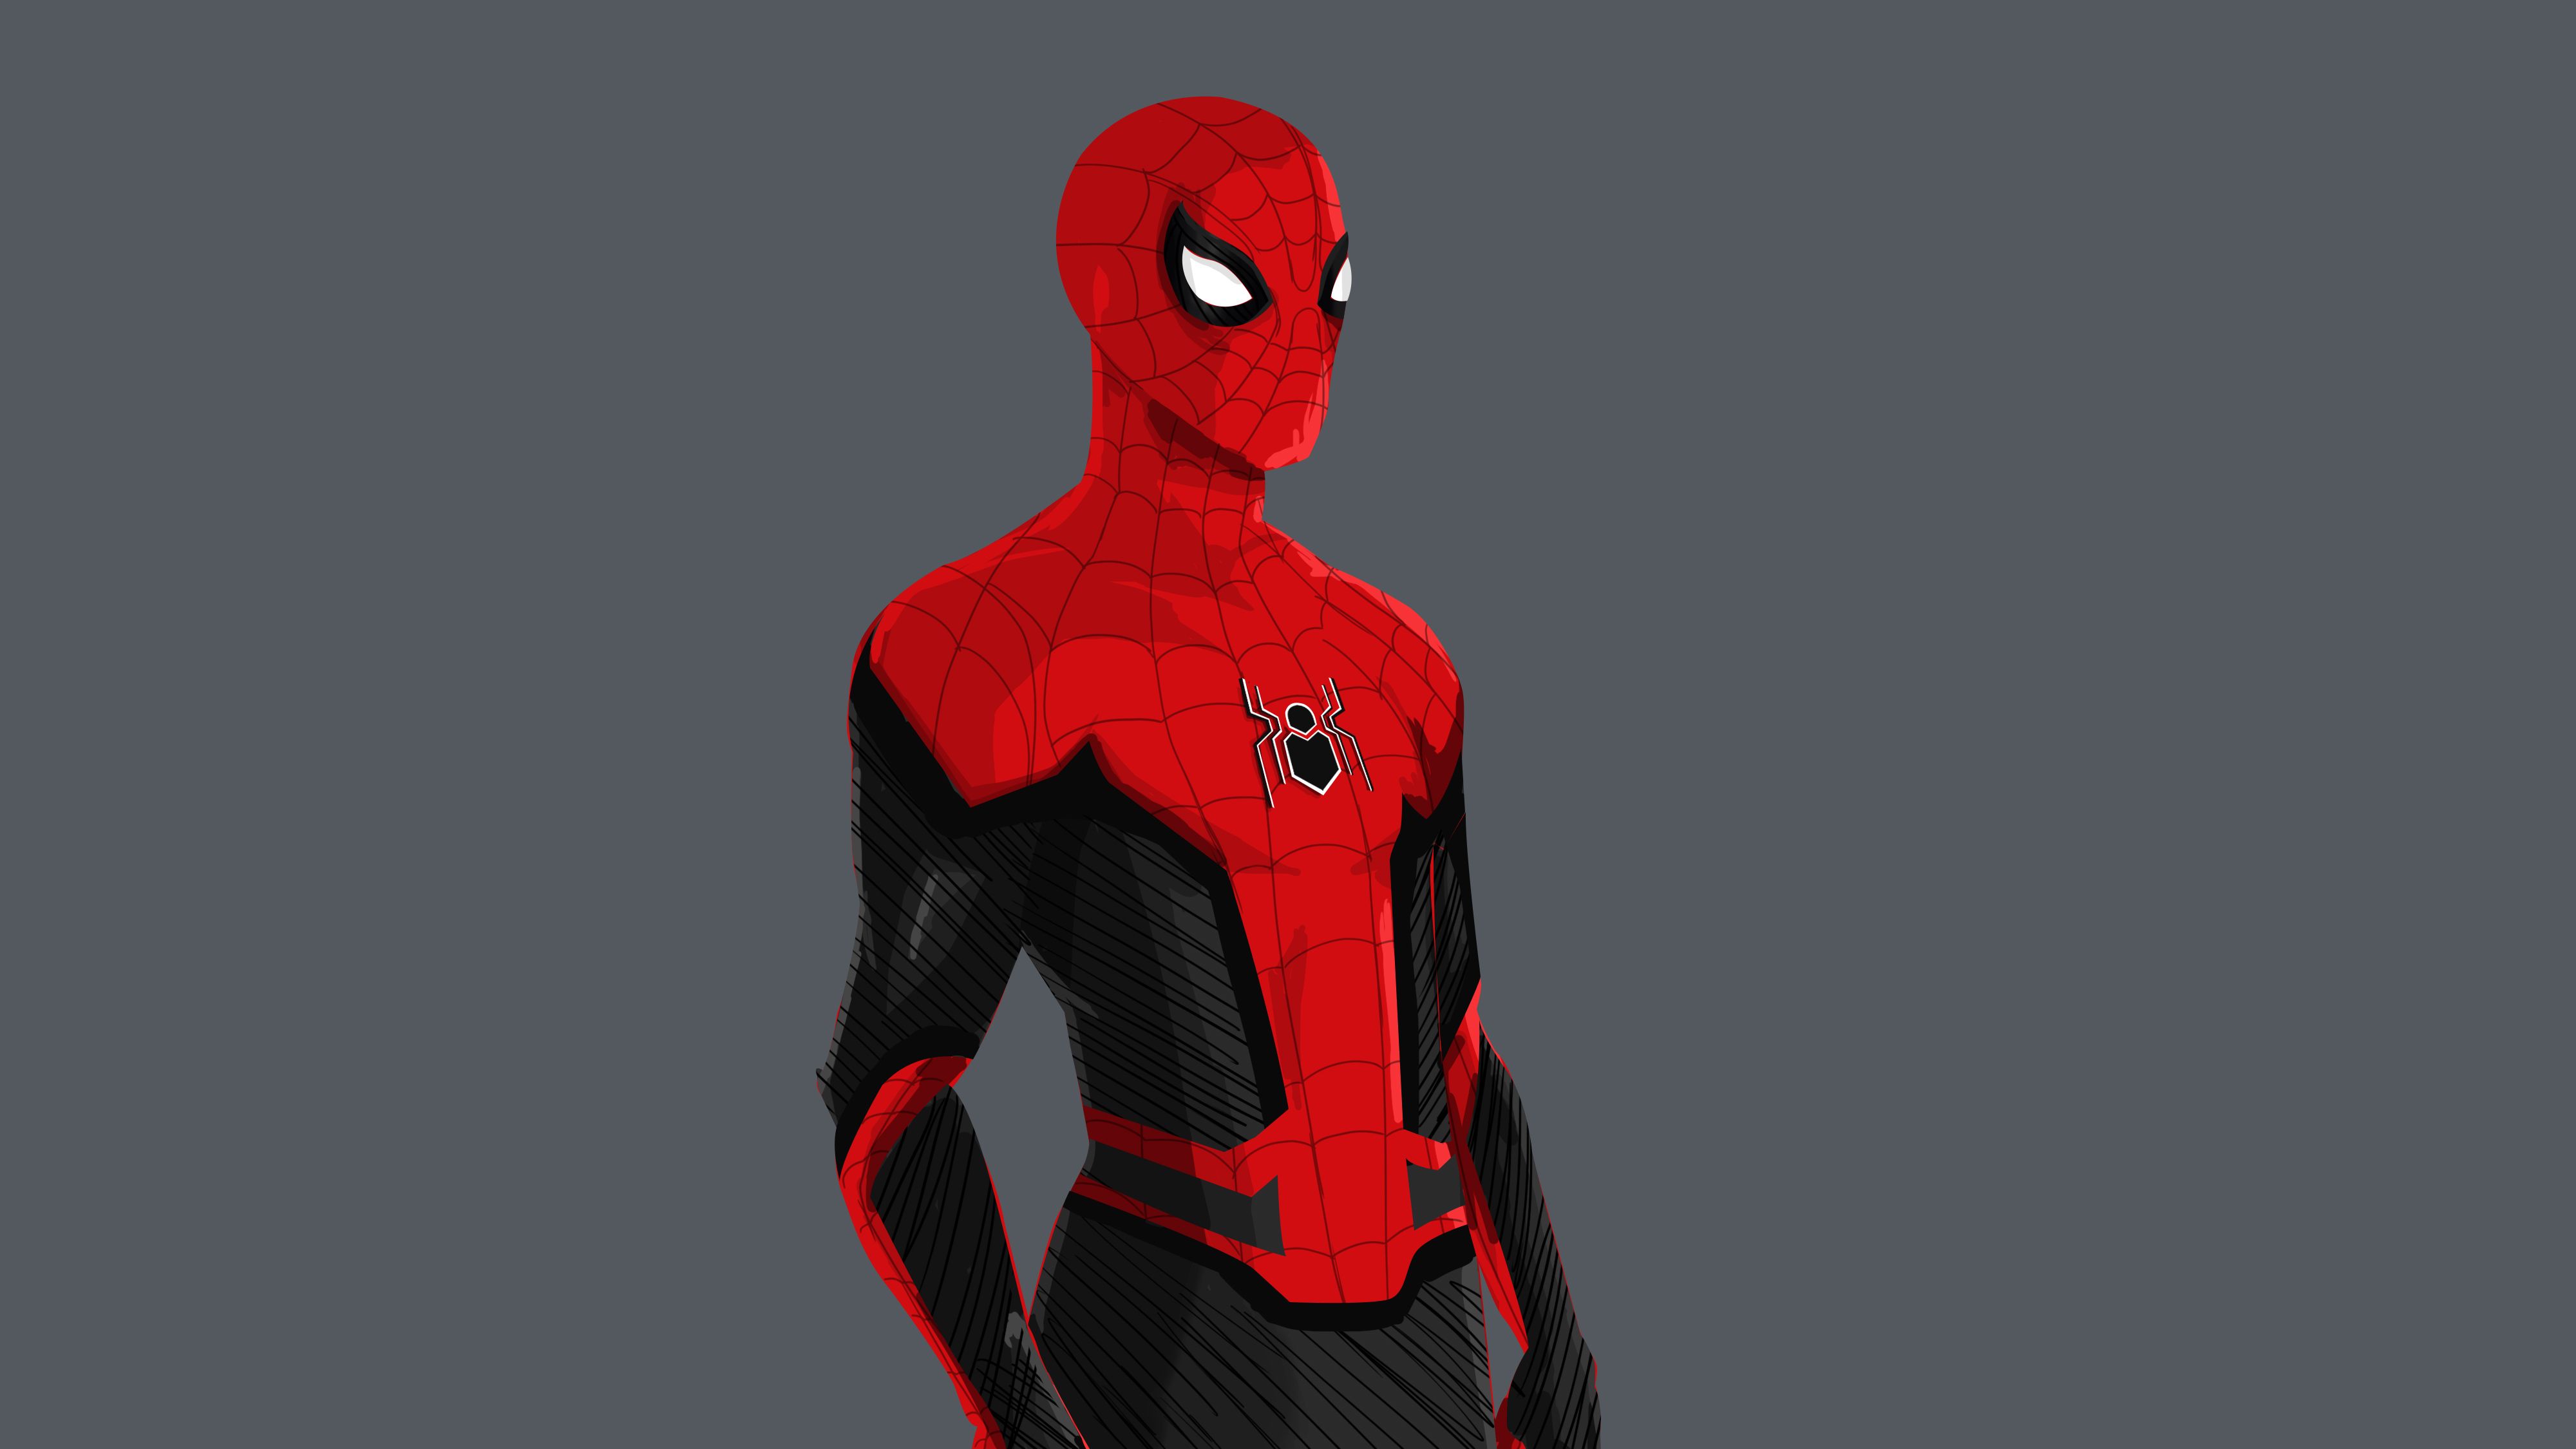 Minimalist Spider Man Far From Home Wallpapers